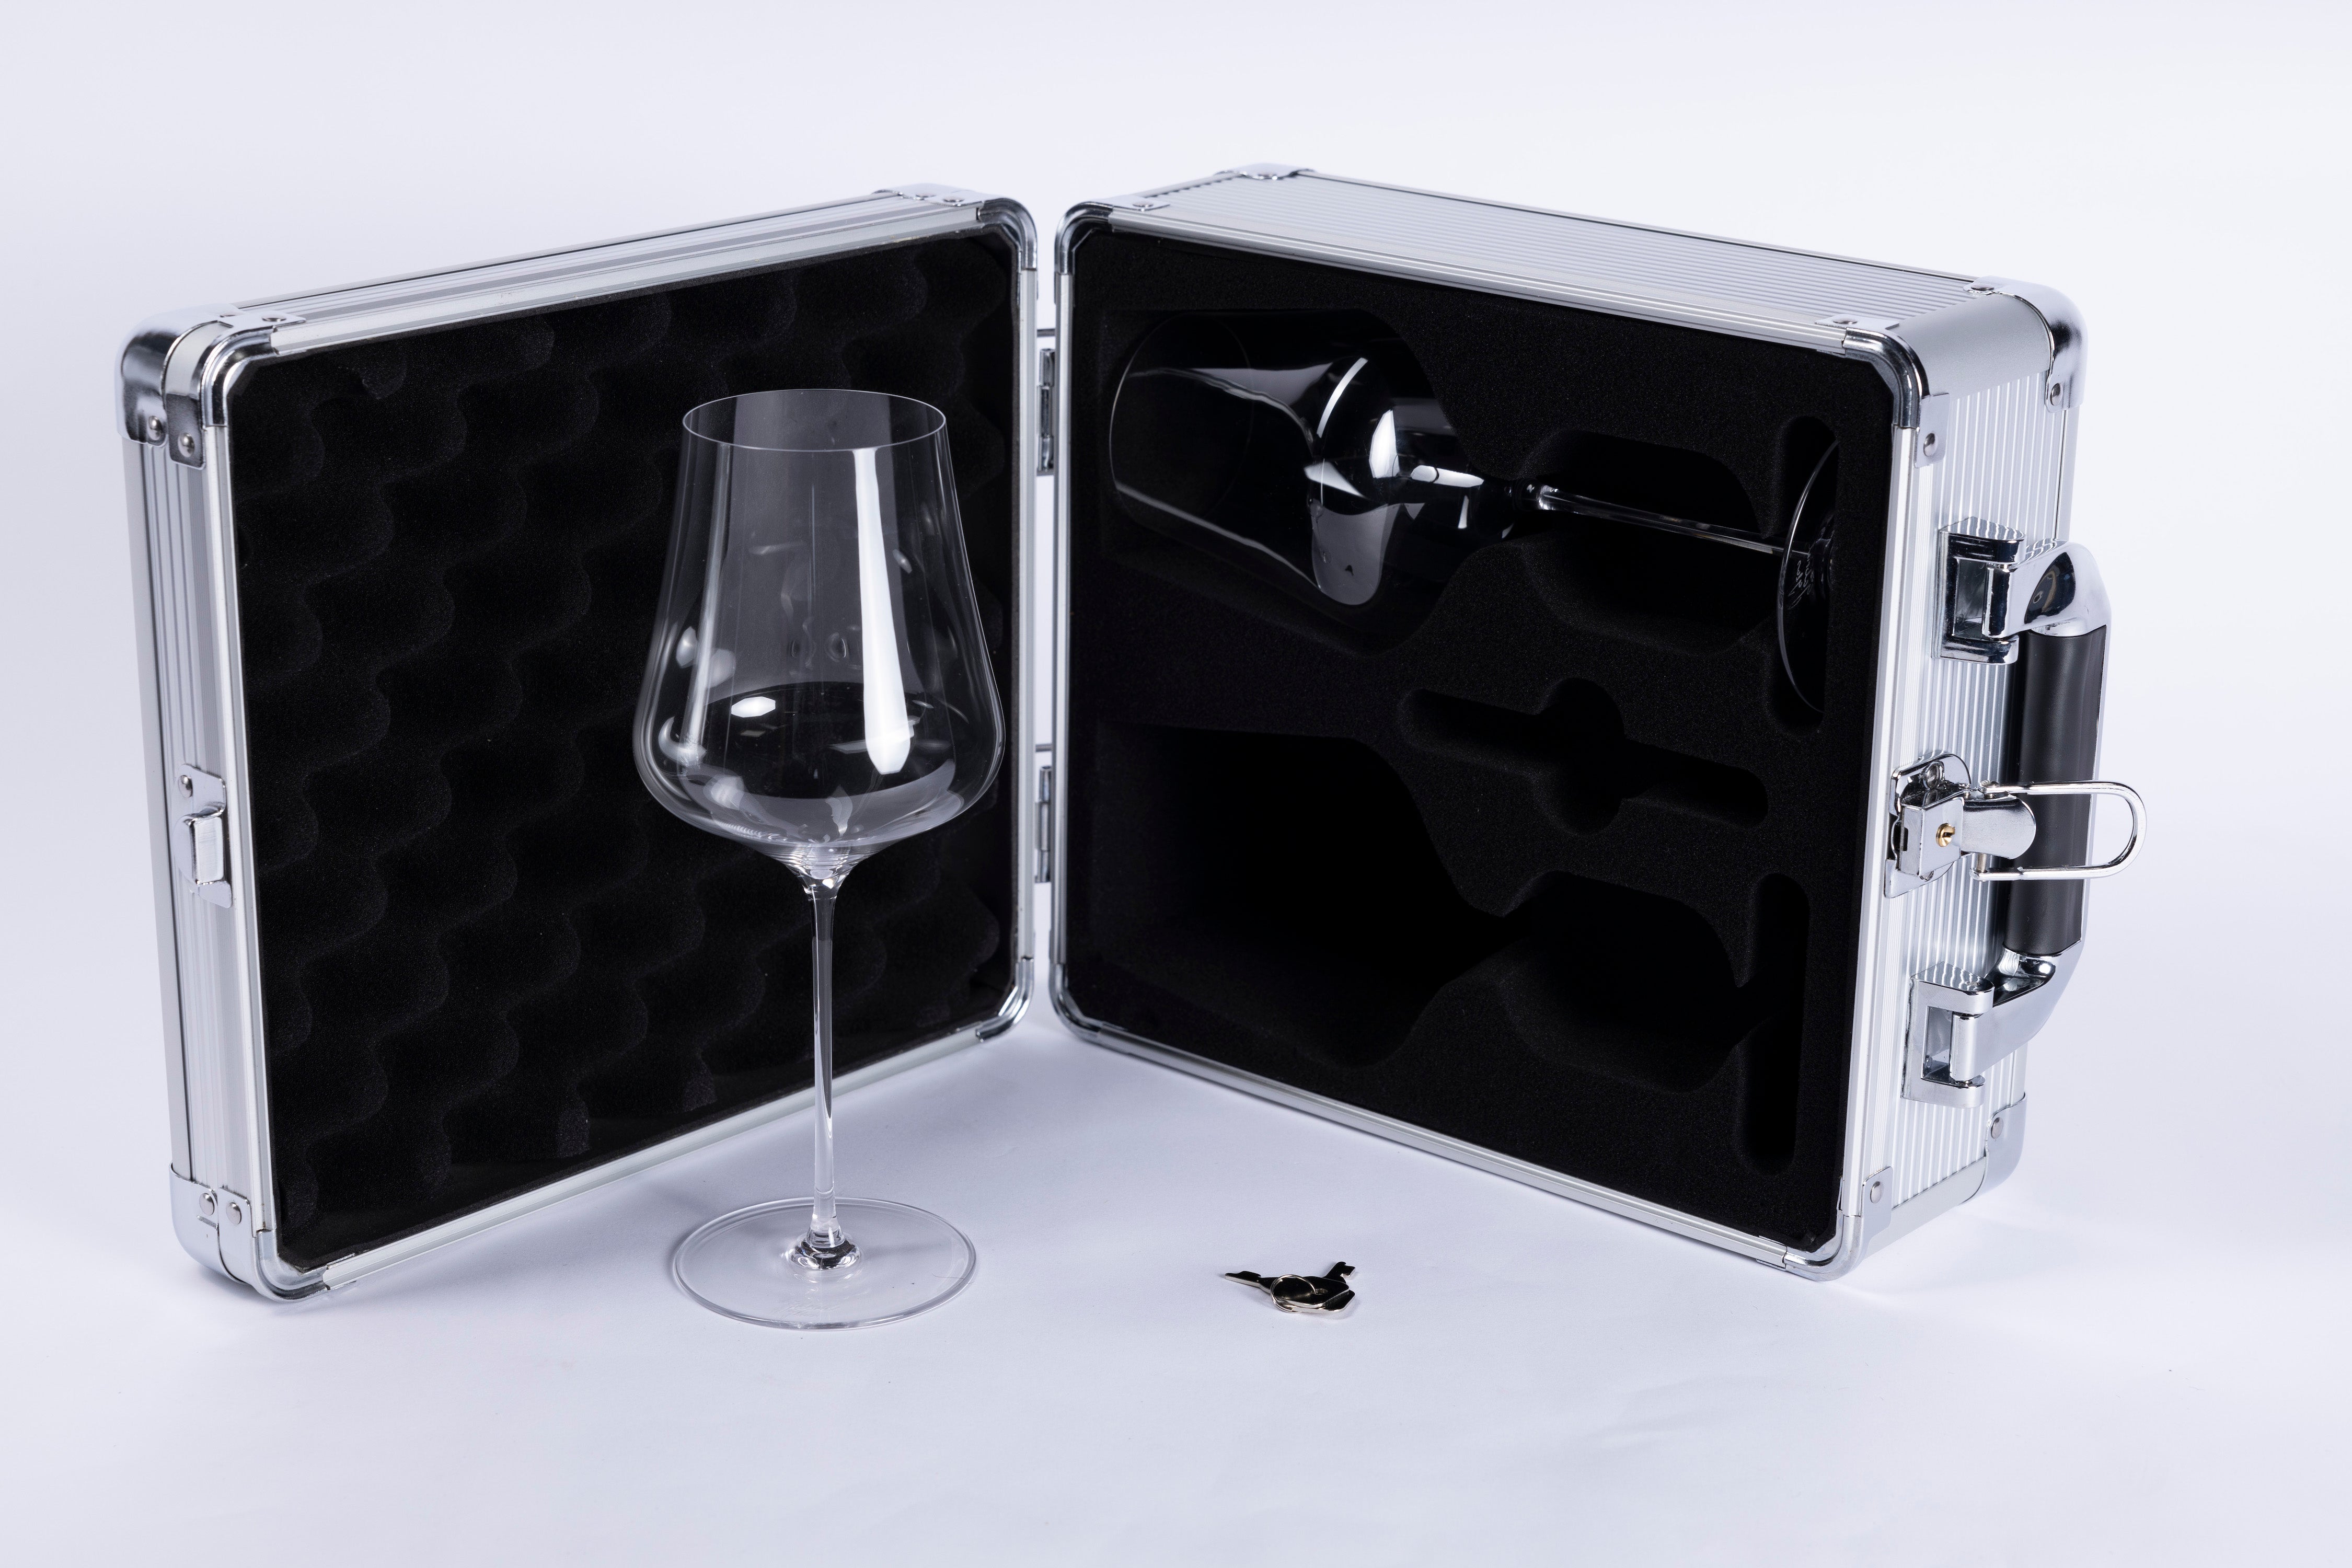 https://cdn.shopify.com/s/files/1/1423/3202/products/AmazonListings-FlyWithWine-2-GlassCase-Ruggeddesign-2022-11-28-29copy.jpg?v=1702060059